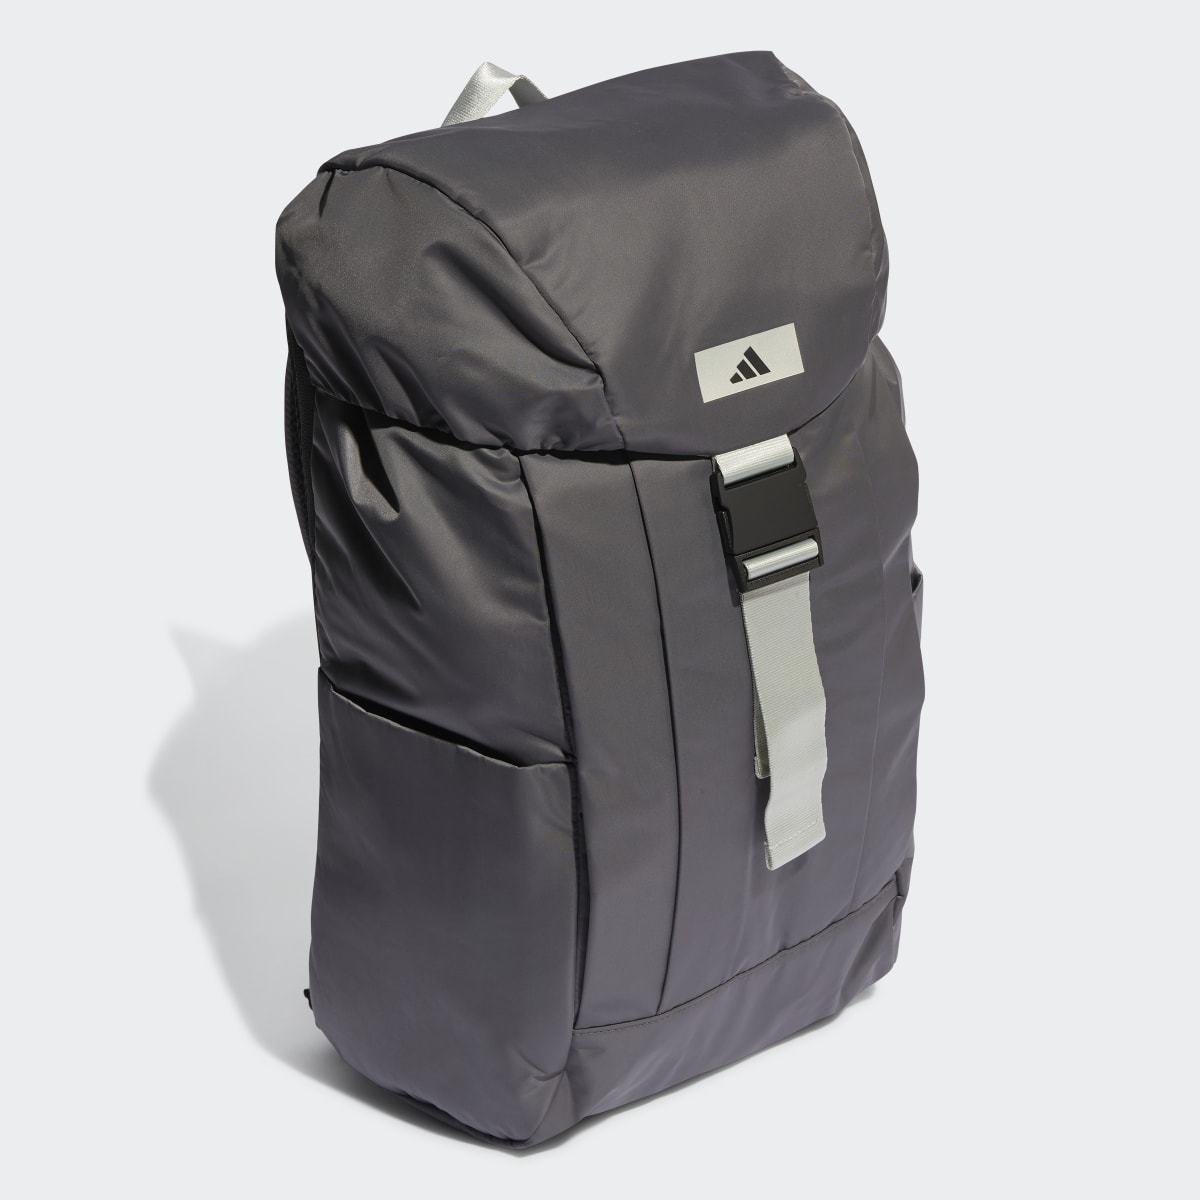 Adidas Gym High-Intensity Backpack. 4